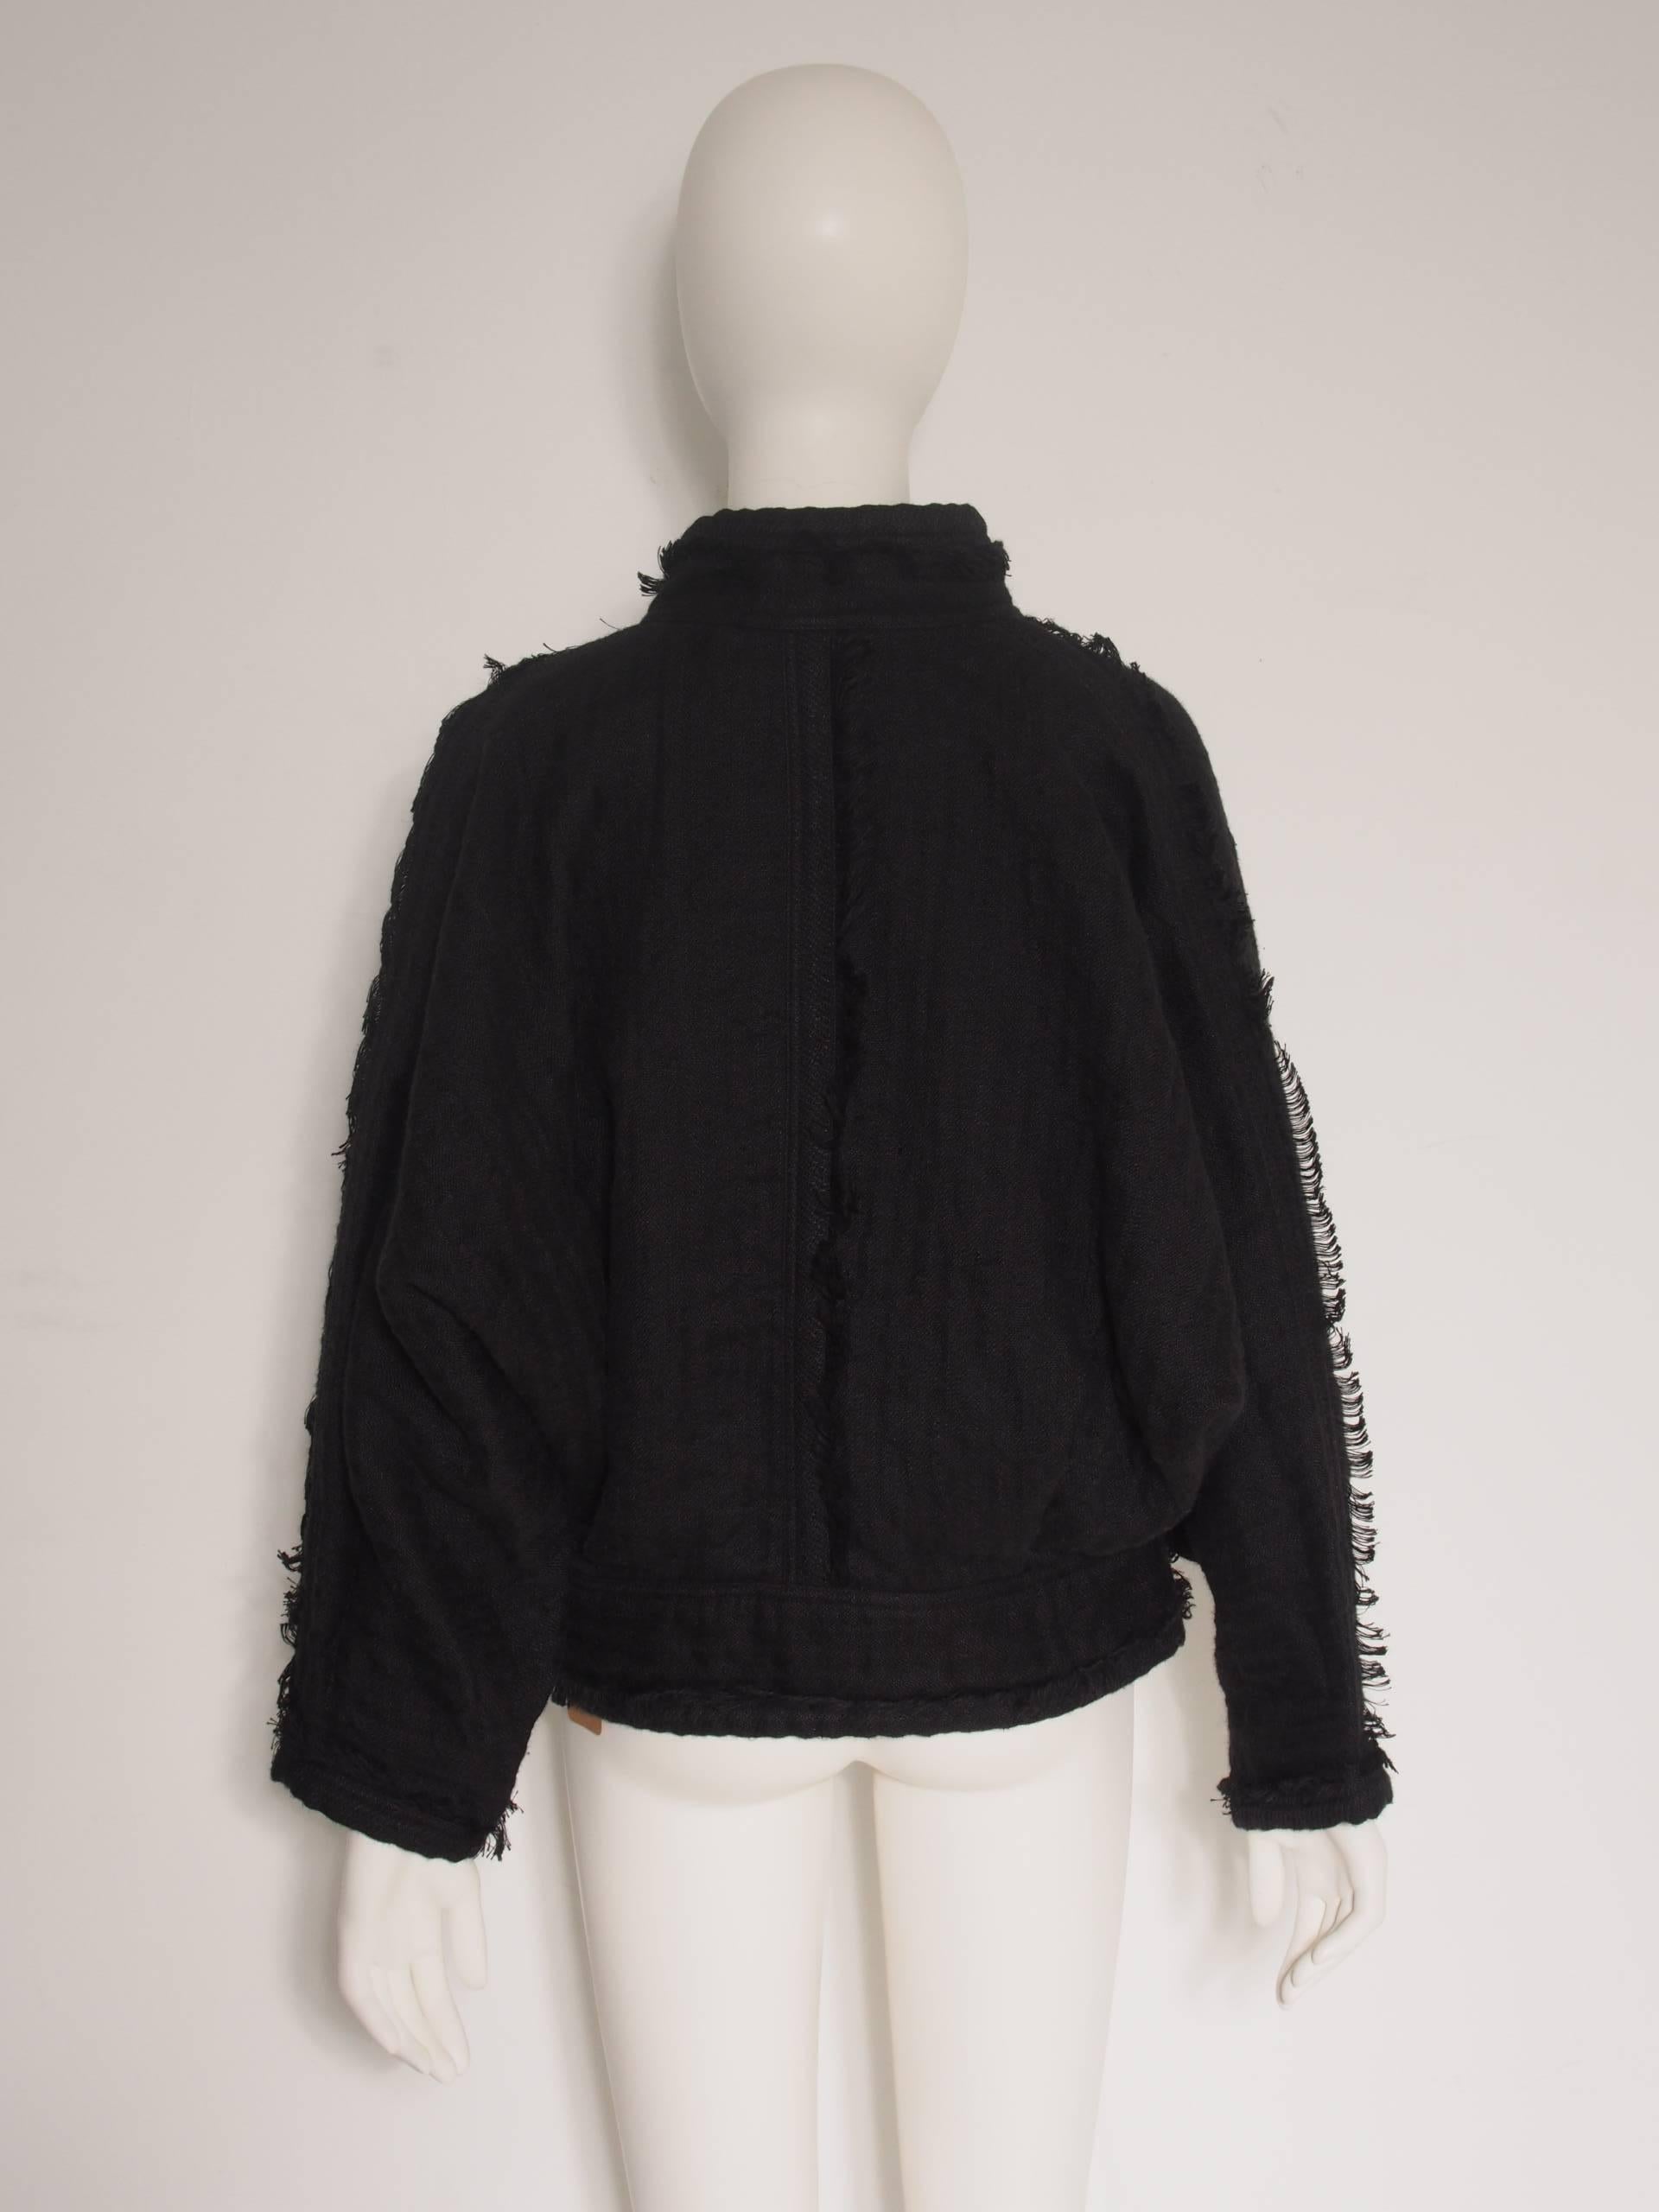 Iconic 1980s batwing woven jacket, button closures, and distressed hems.